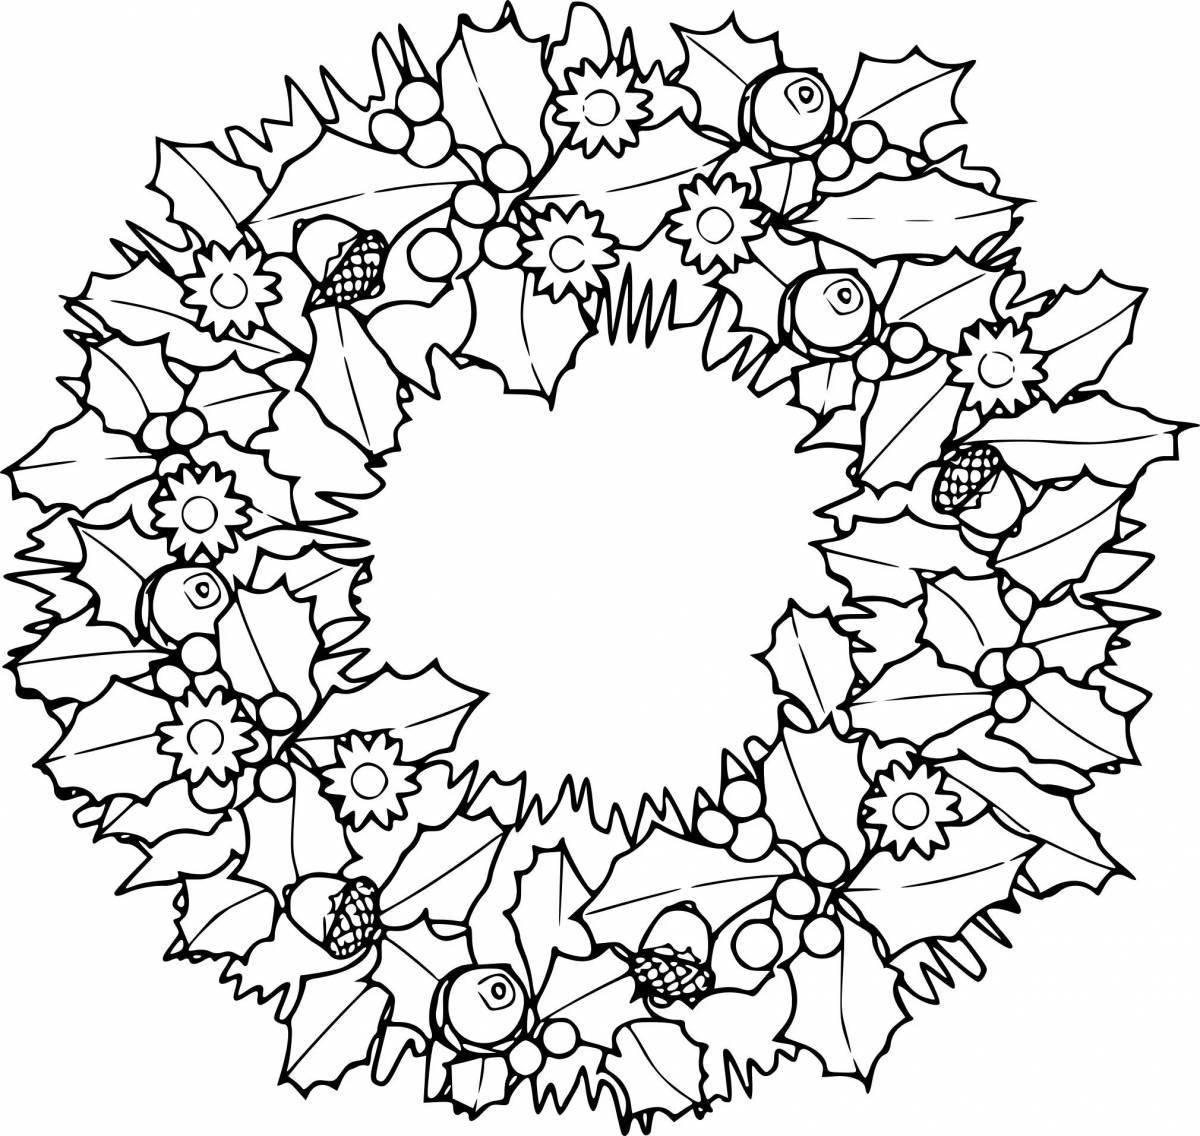 Decorated Christmas wreath coloring book for kids